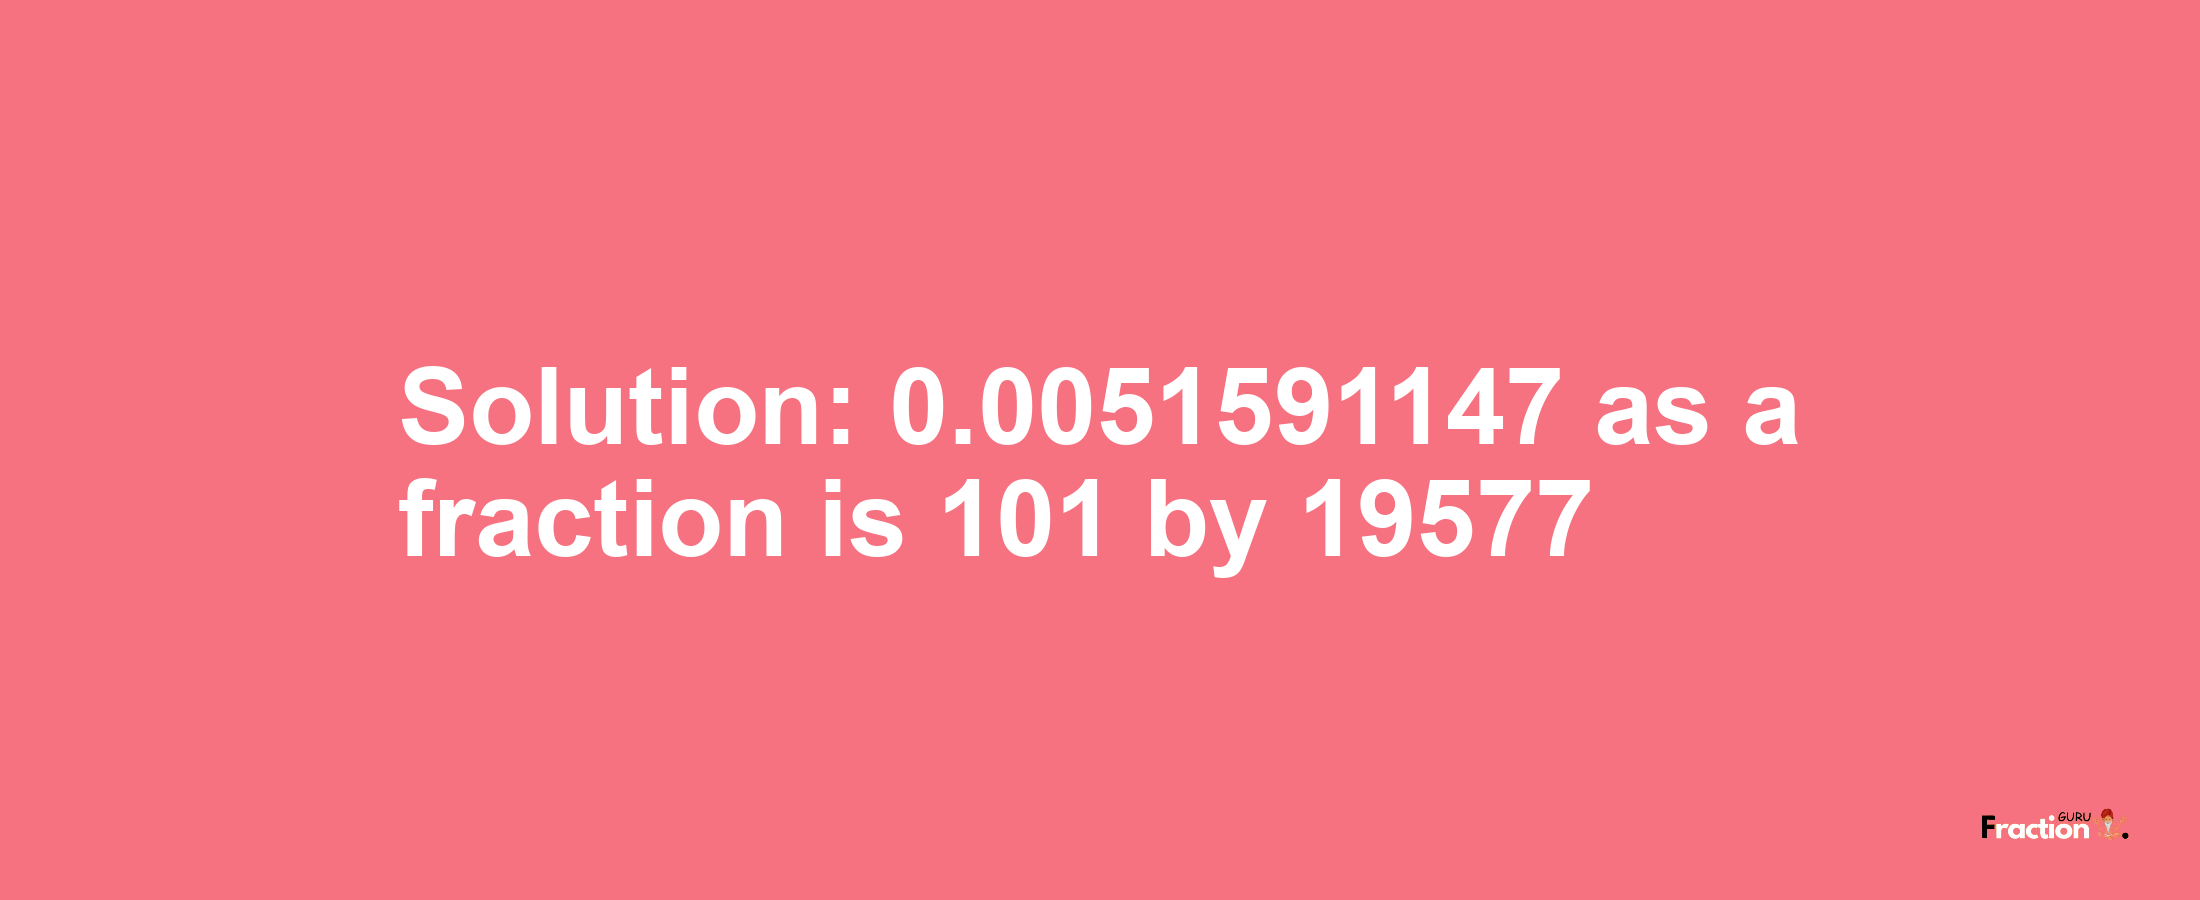 Solution:0.0051591147 as a fraction is 101/19577